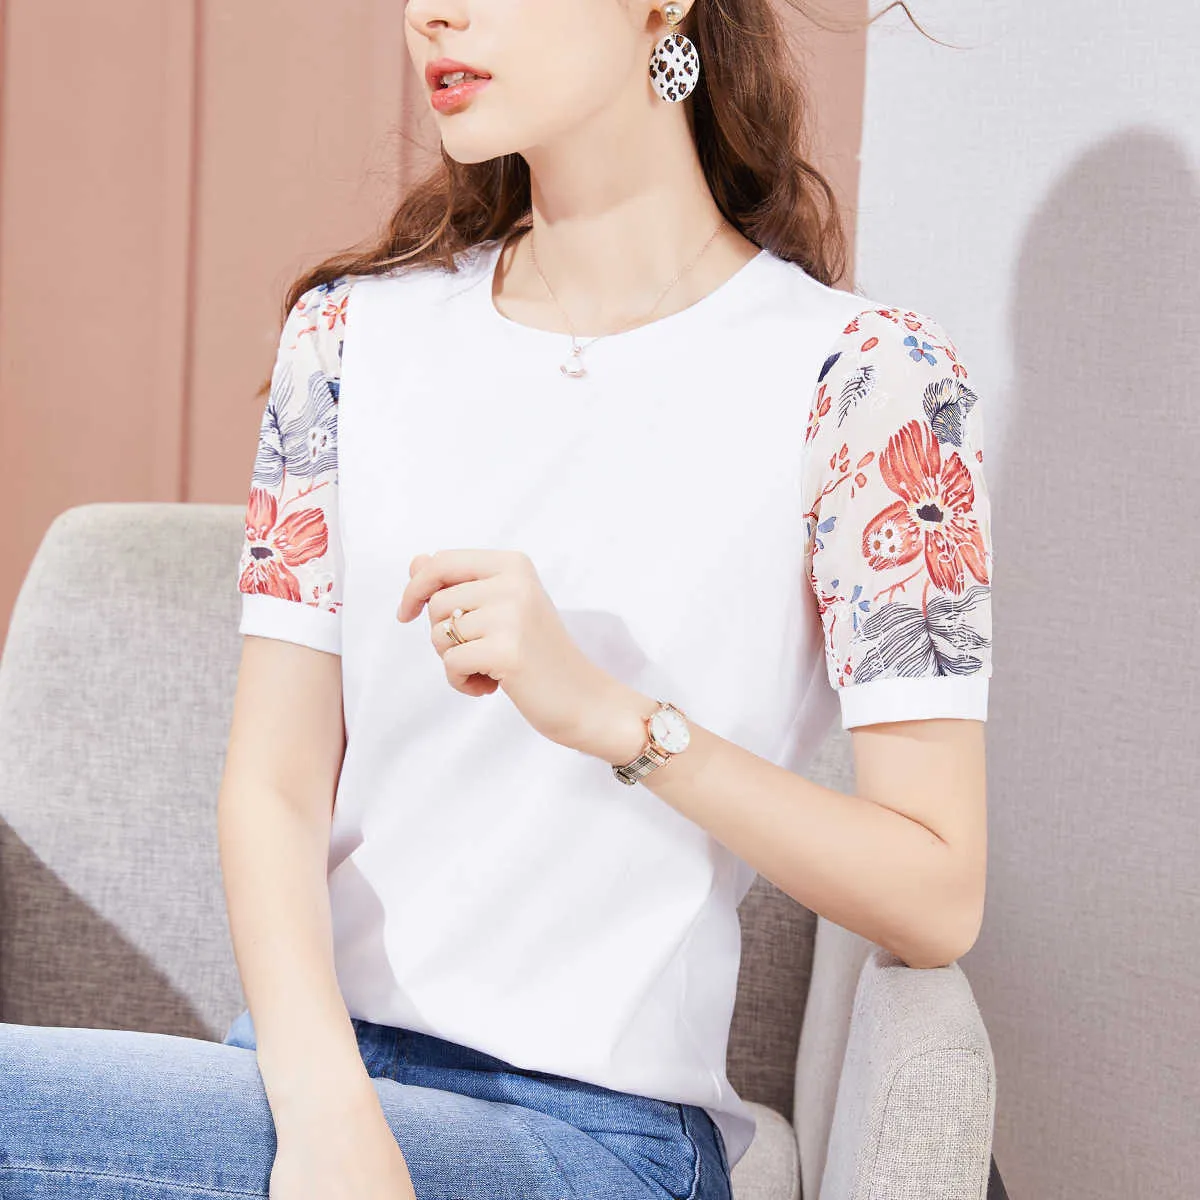 Puff Sleeve Short Lace Patchwork Floral White T Shirt Women Fashion Summer Tops Korean Style Clothes Tshirt Tee Femme 210615